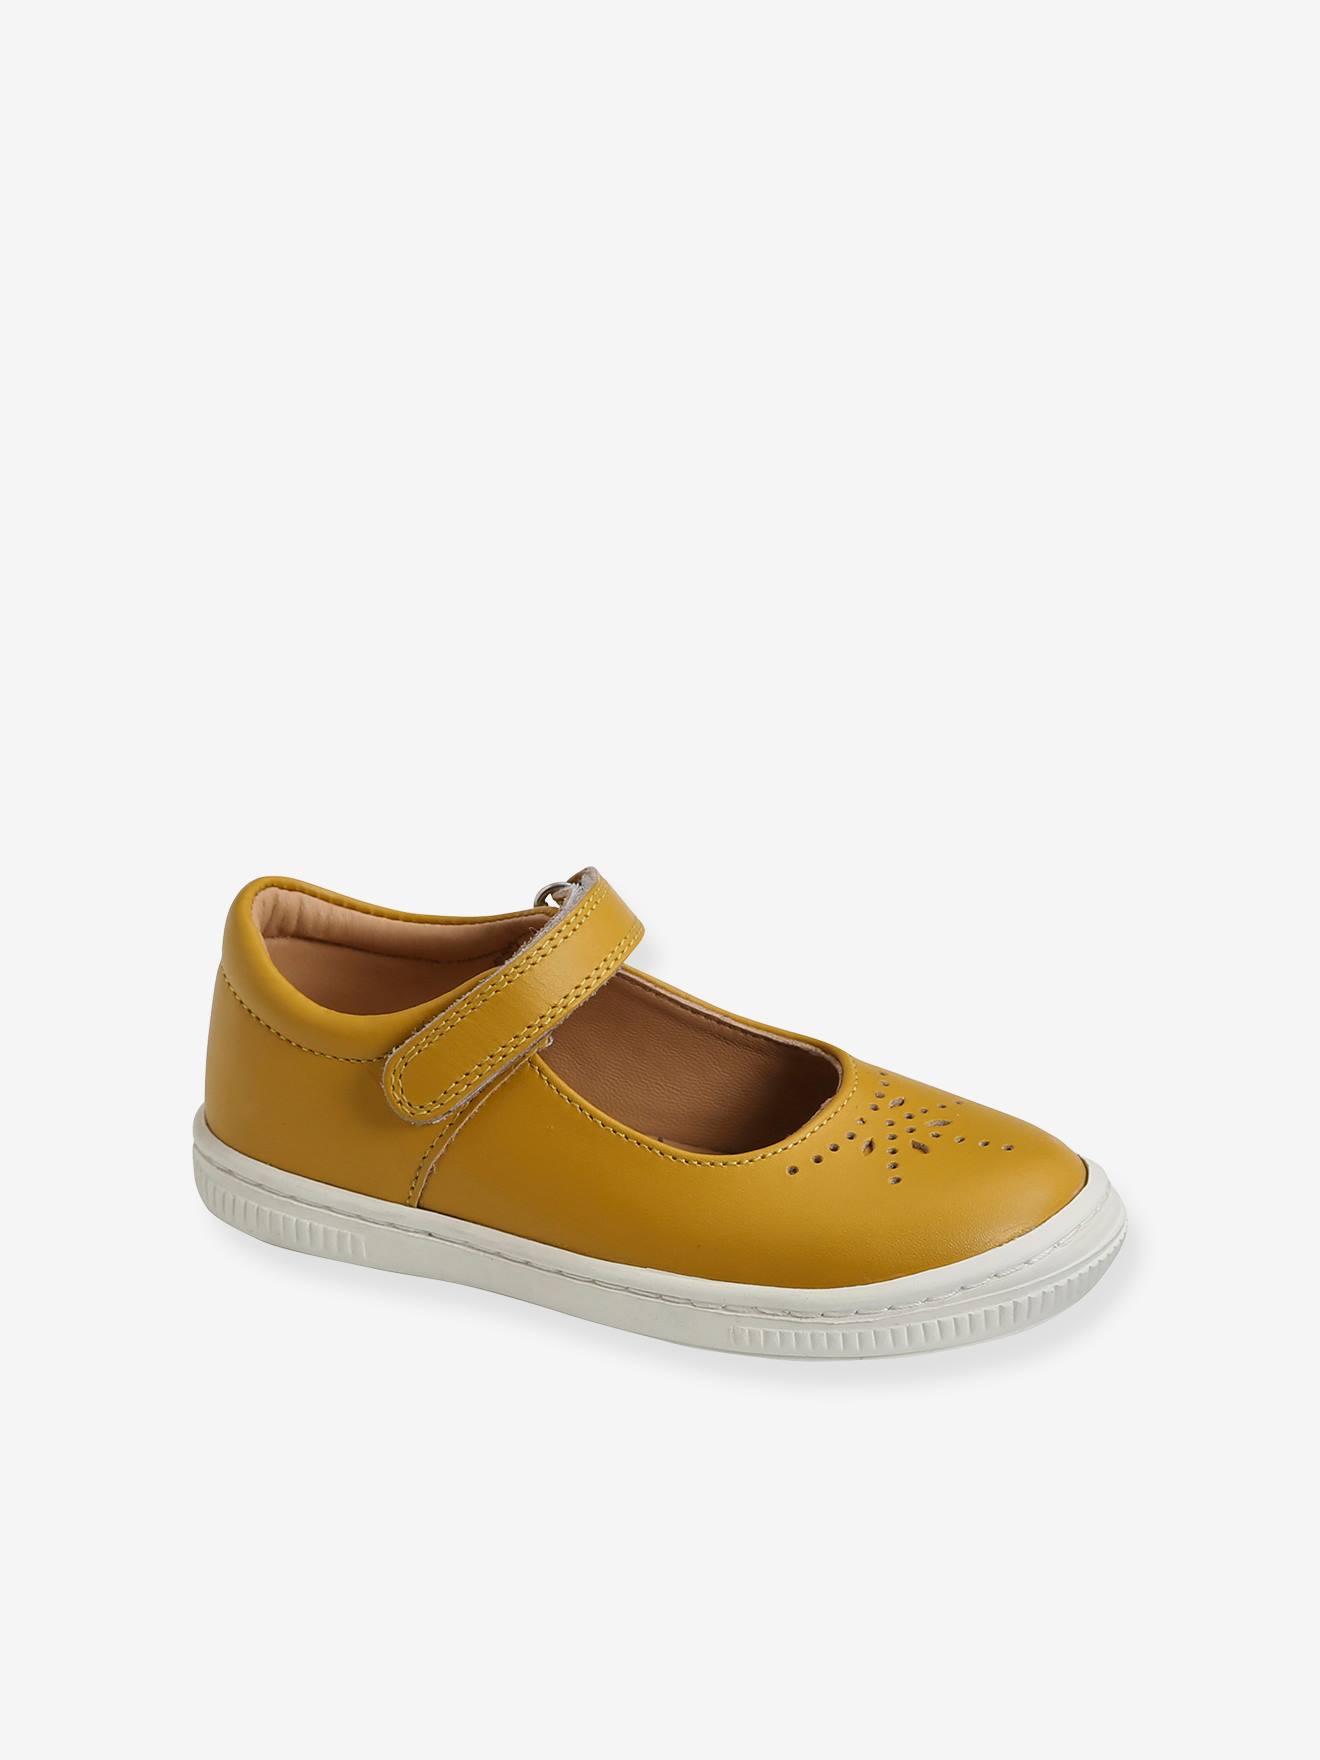 Babies cuir fille collection maternelle jaune moutarde